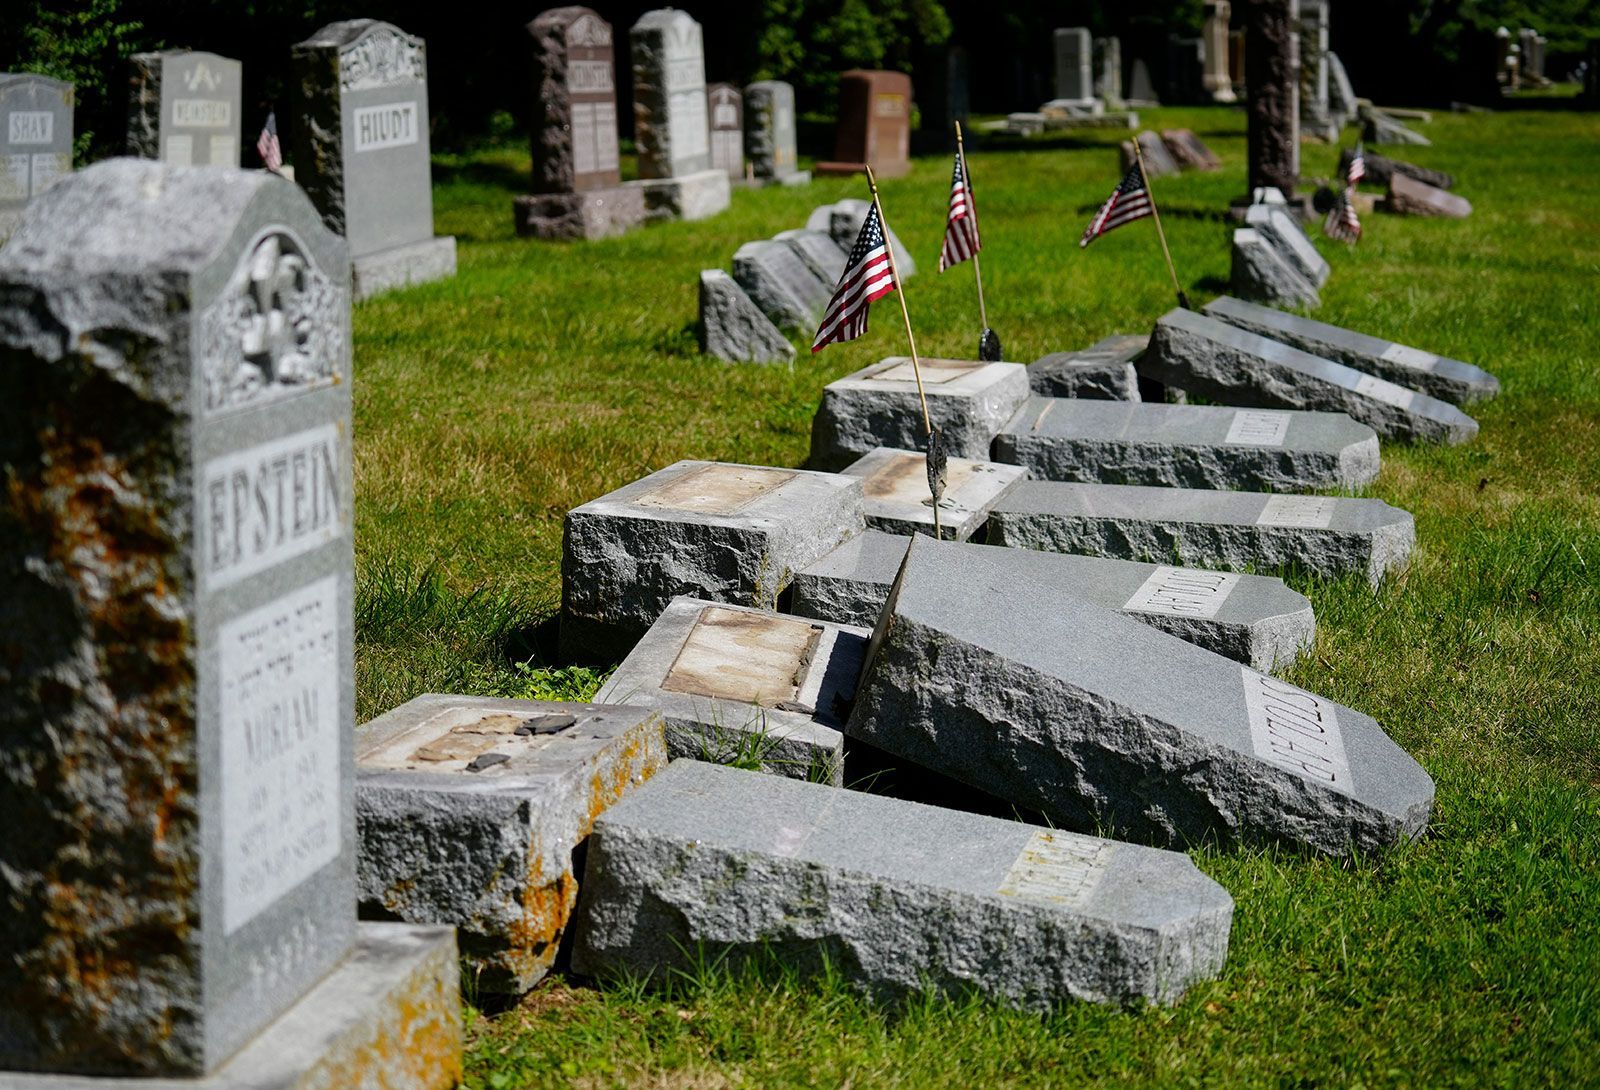 <i>Liz Dufour/The Enquirer/USA Today Network via CNN Newsource</i><br/>Many of the 176 gravestones that were vandalized at the cemeteries had American flags